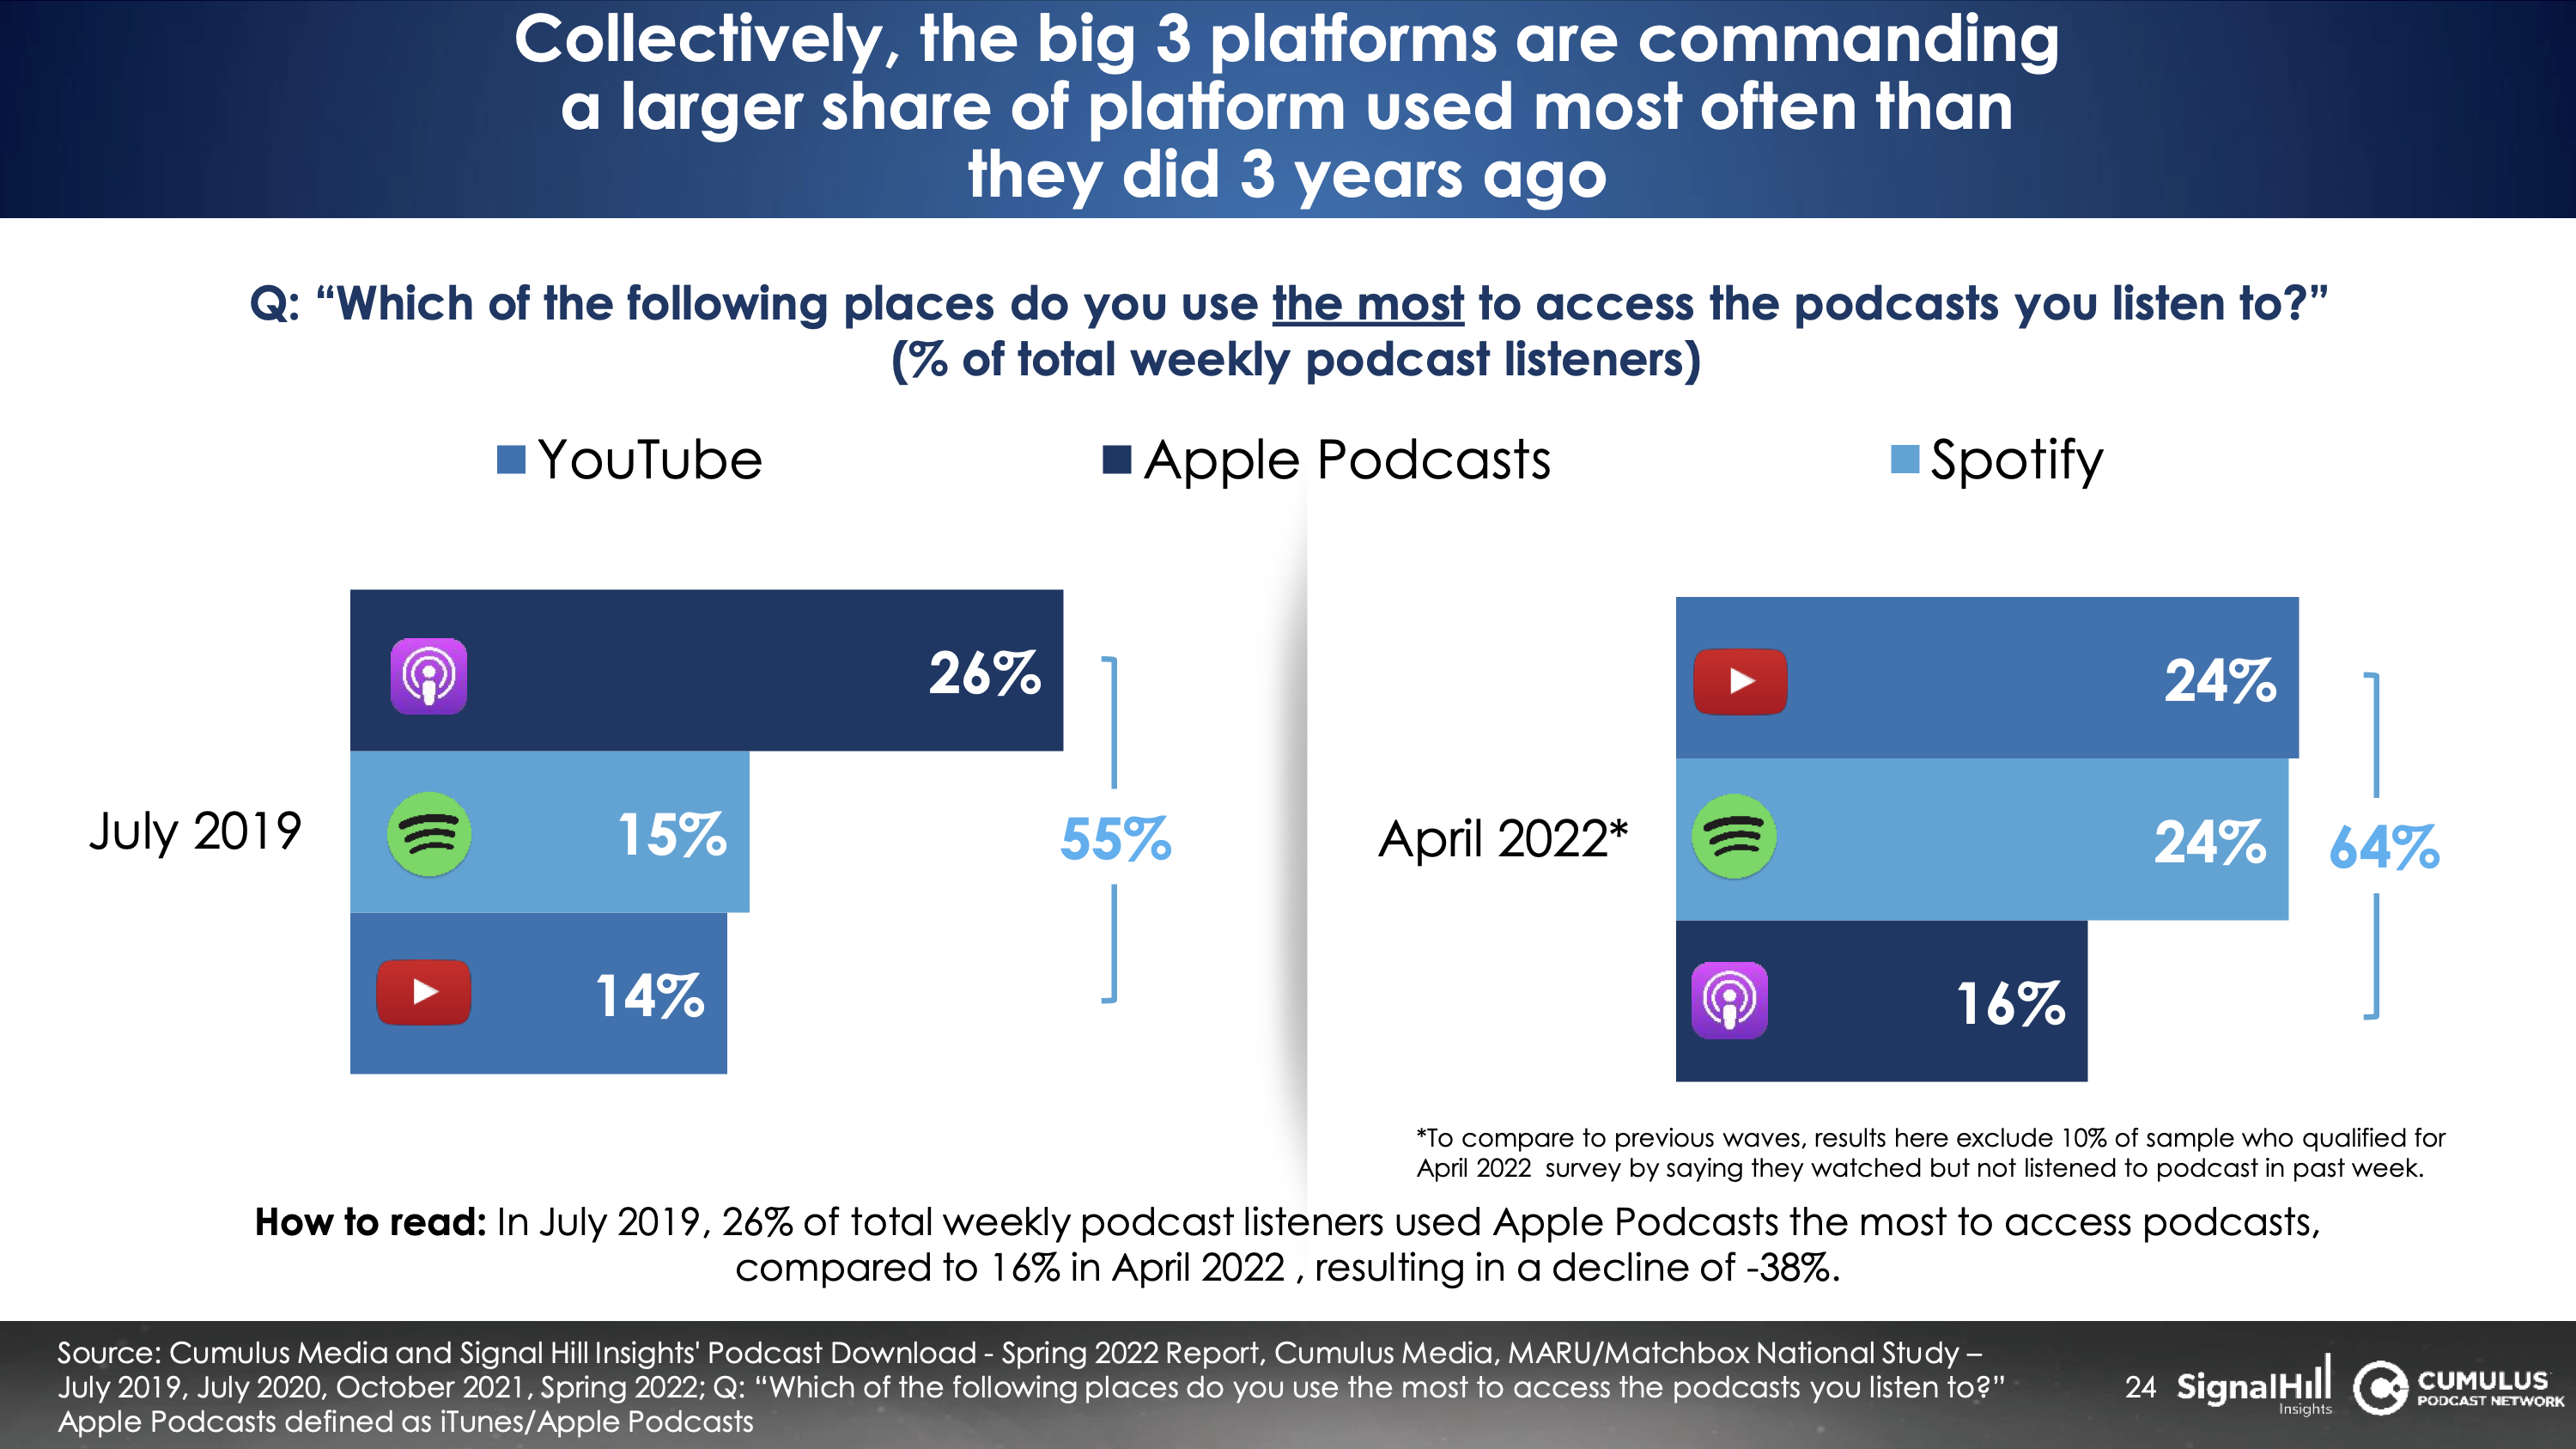 How YouTube, Spotify and Apple Podcasts stack up